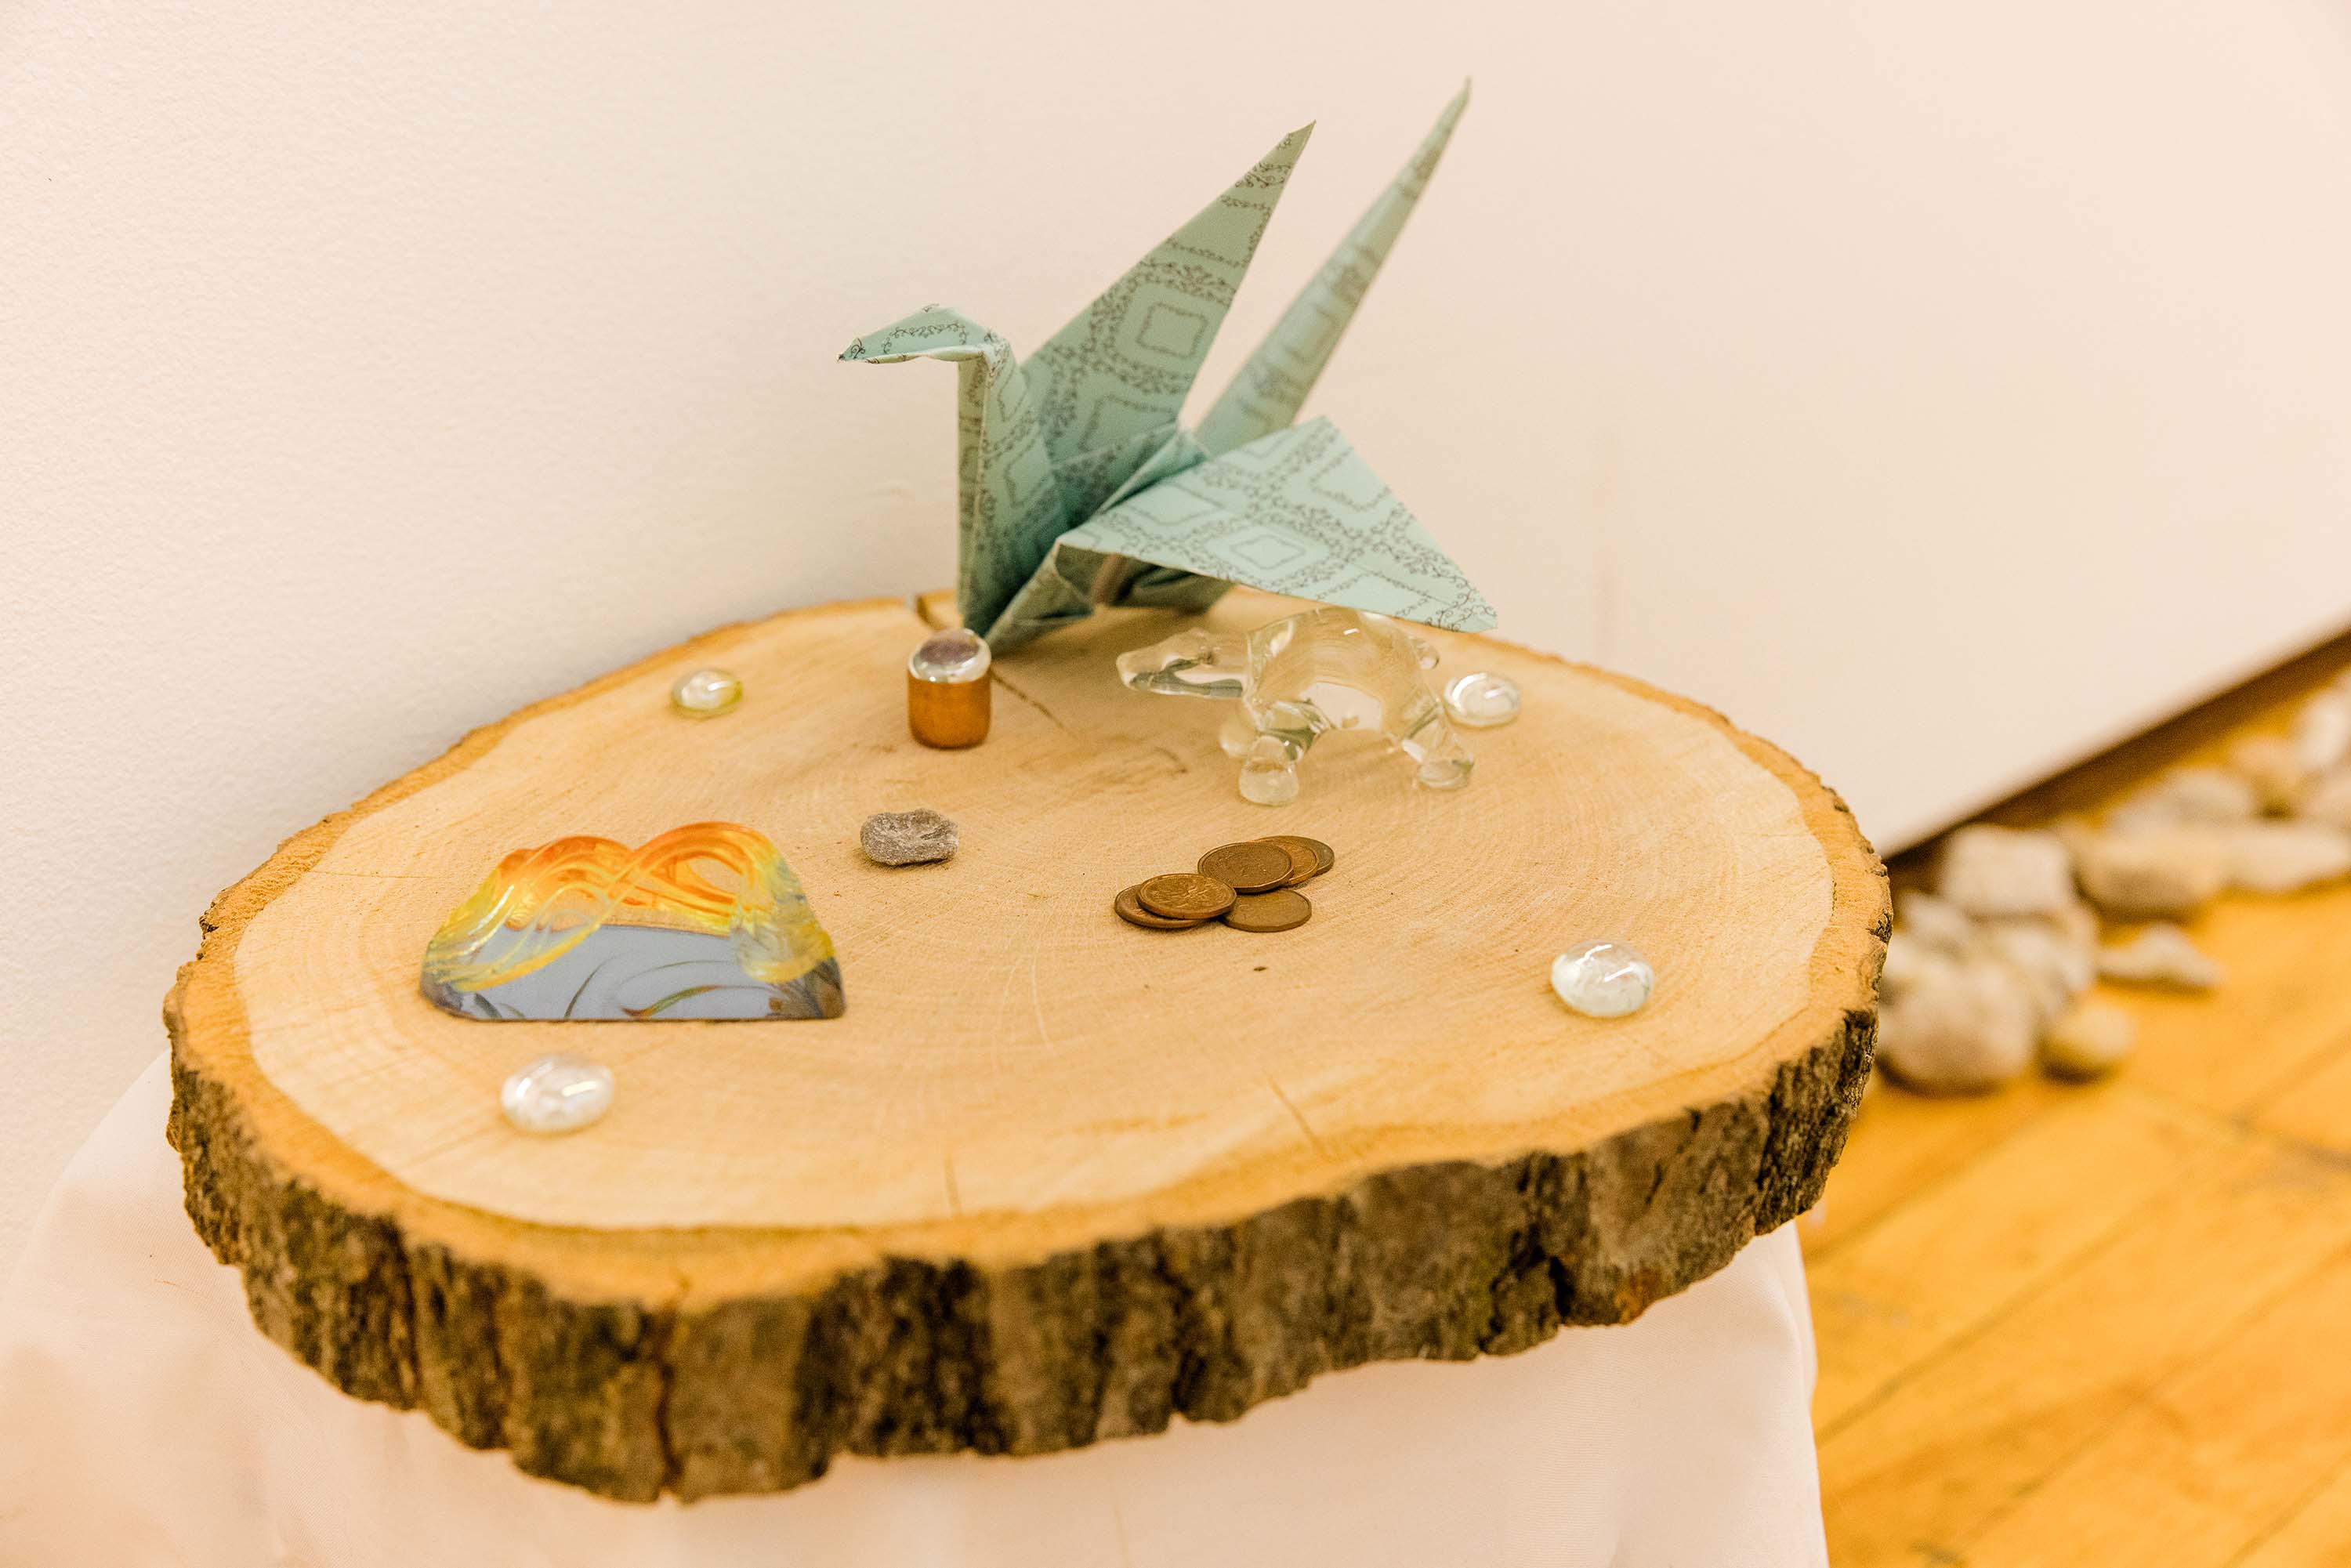 A round piece of wood displaying small objects including a paper crane and a glass polar bear.